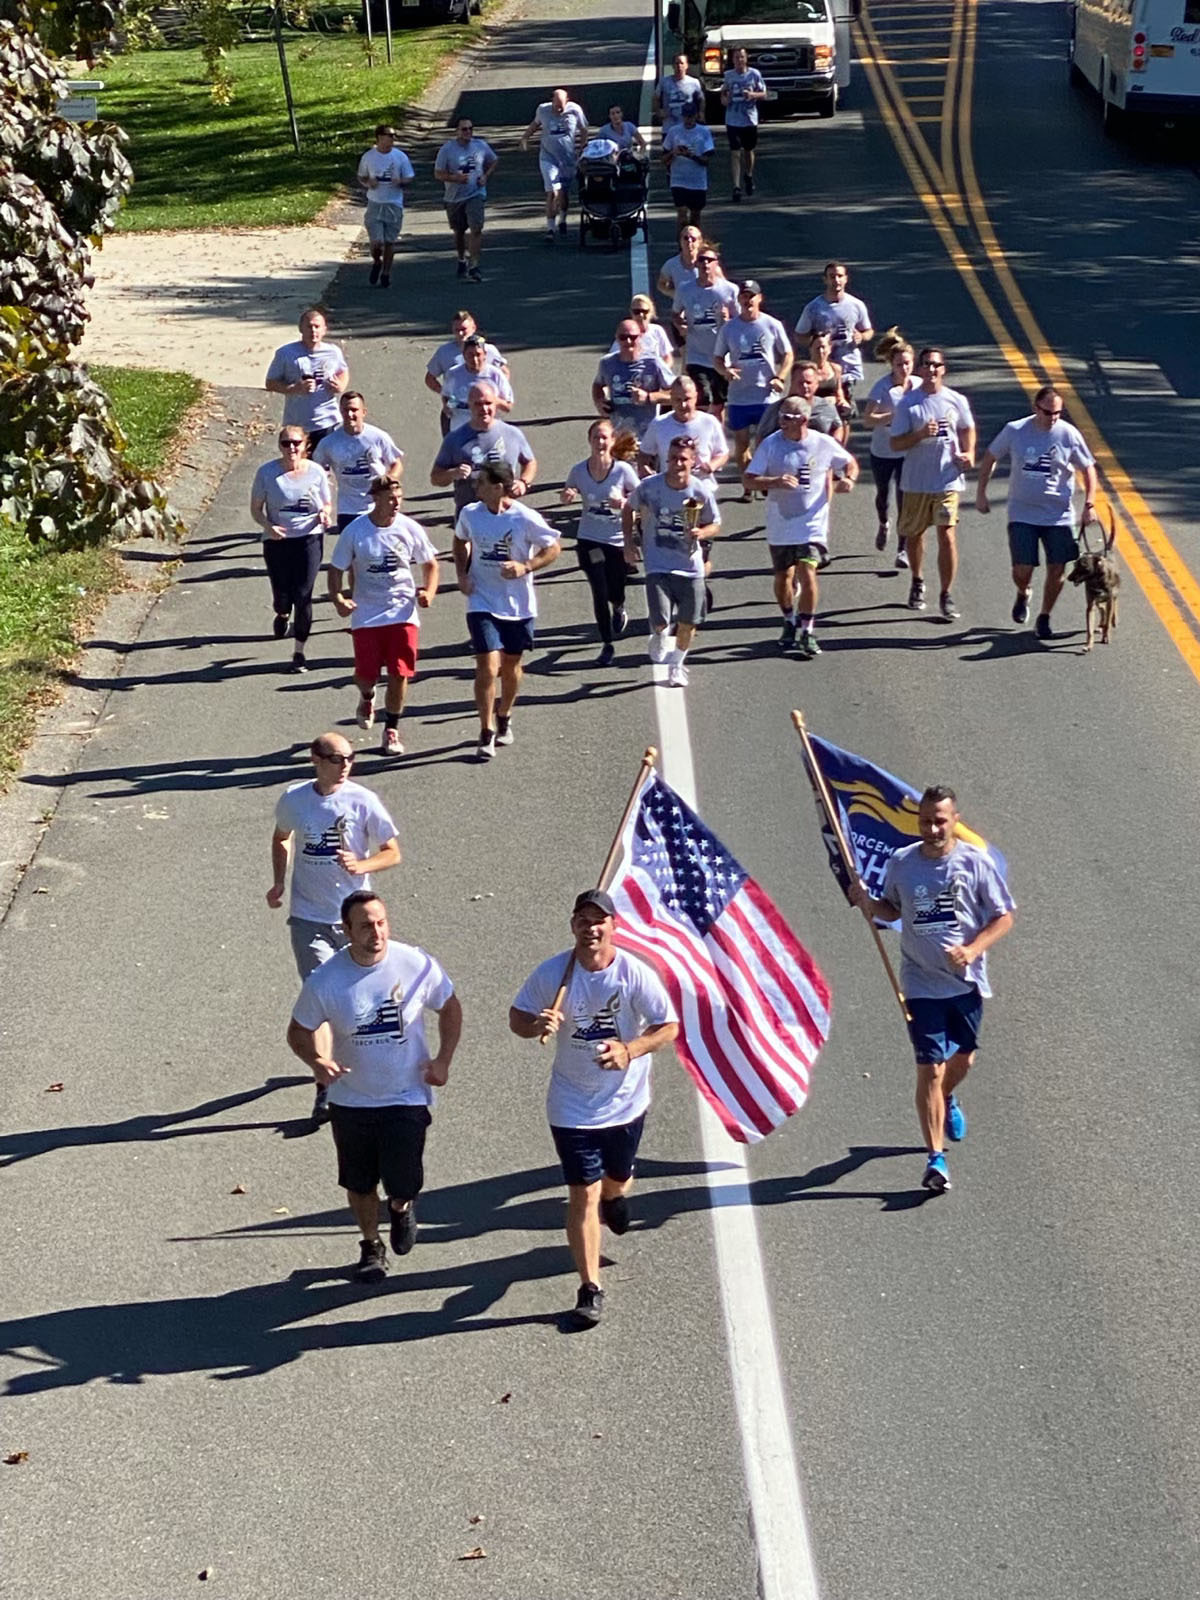 The Special Olympics torch was carried from Montauk to East Hampton on Thursday in preparation for the New York State Games, which will be held in Glens Falls, New York on Friday and Saturday.  REBECCA HOFFMAN/SPECIAL OLYMPICS